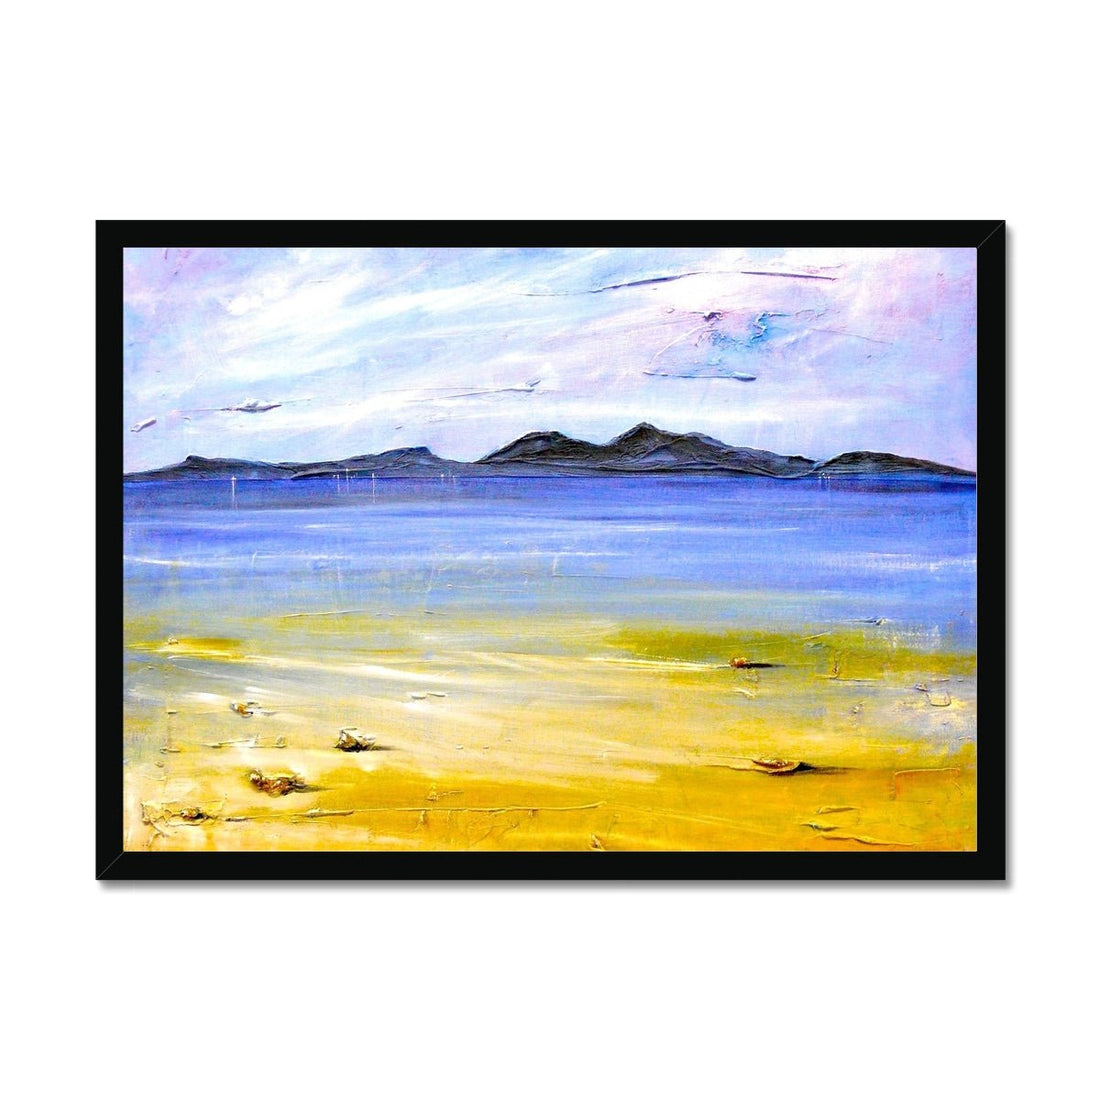 Camusdarach Beach Arisaig Painting | Framed Print | Paintings from Scotland by Scottish Artist Hunter